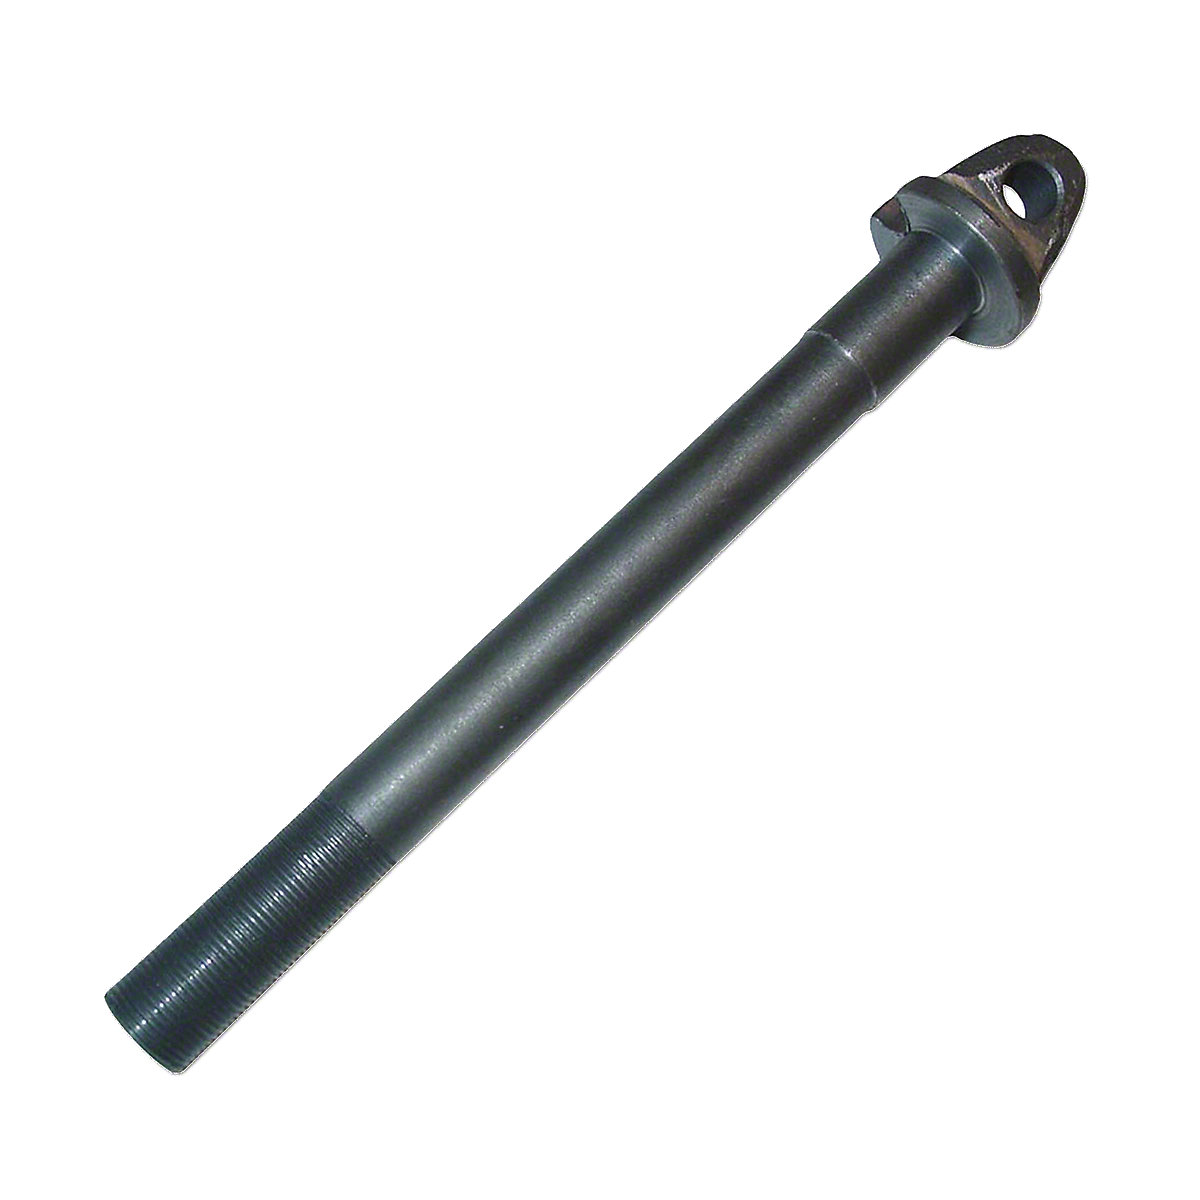 Hydraulic Lift Draft Control Plunger For Massey Ferguson: TE20, TEA20, TO20, TO30.